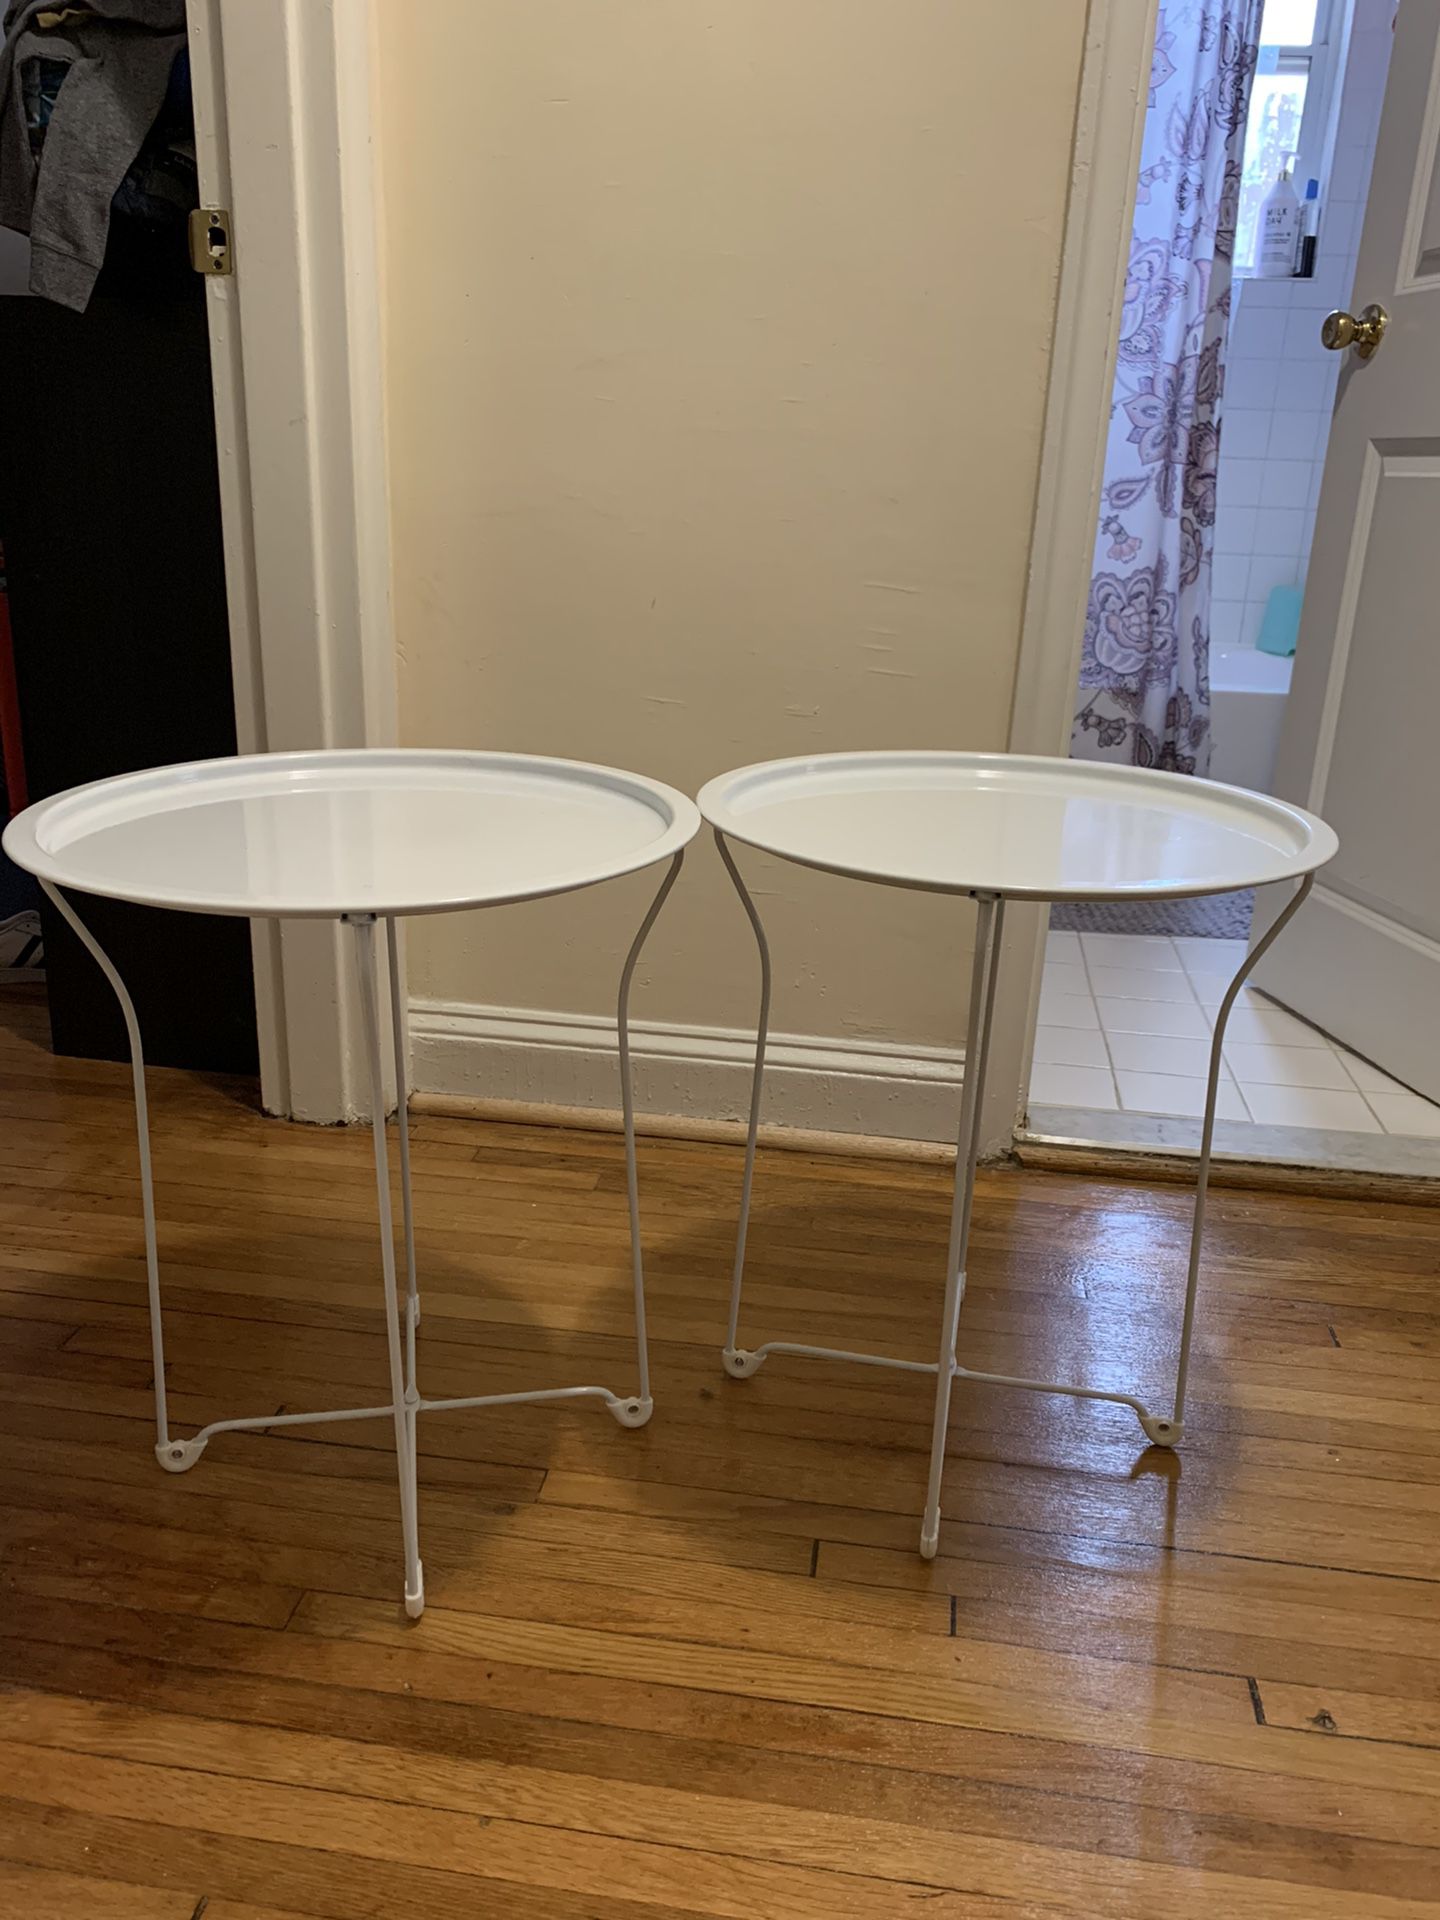 2 beautiful modern side tables!!!- Serious Inquiry’s Only!!